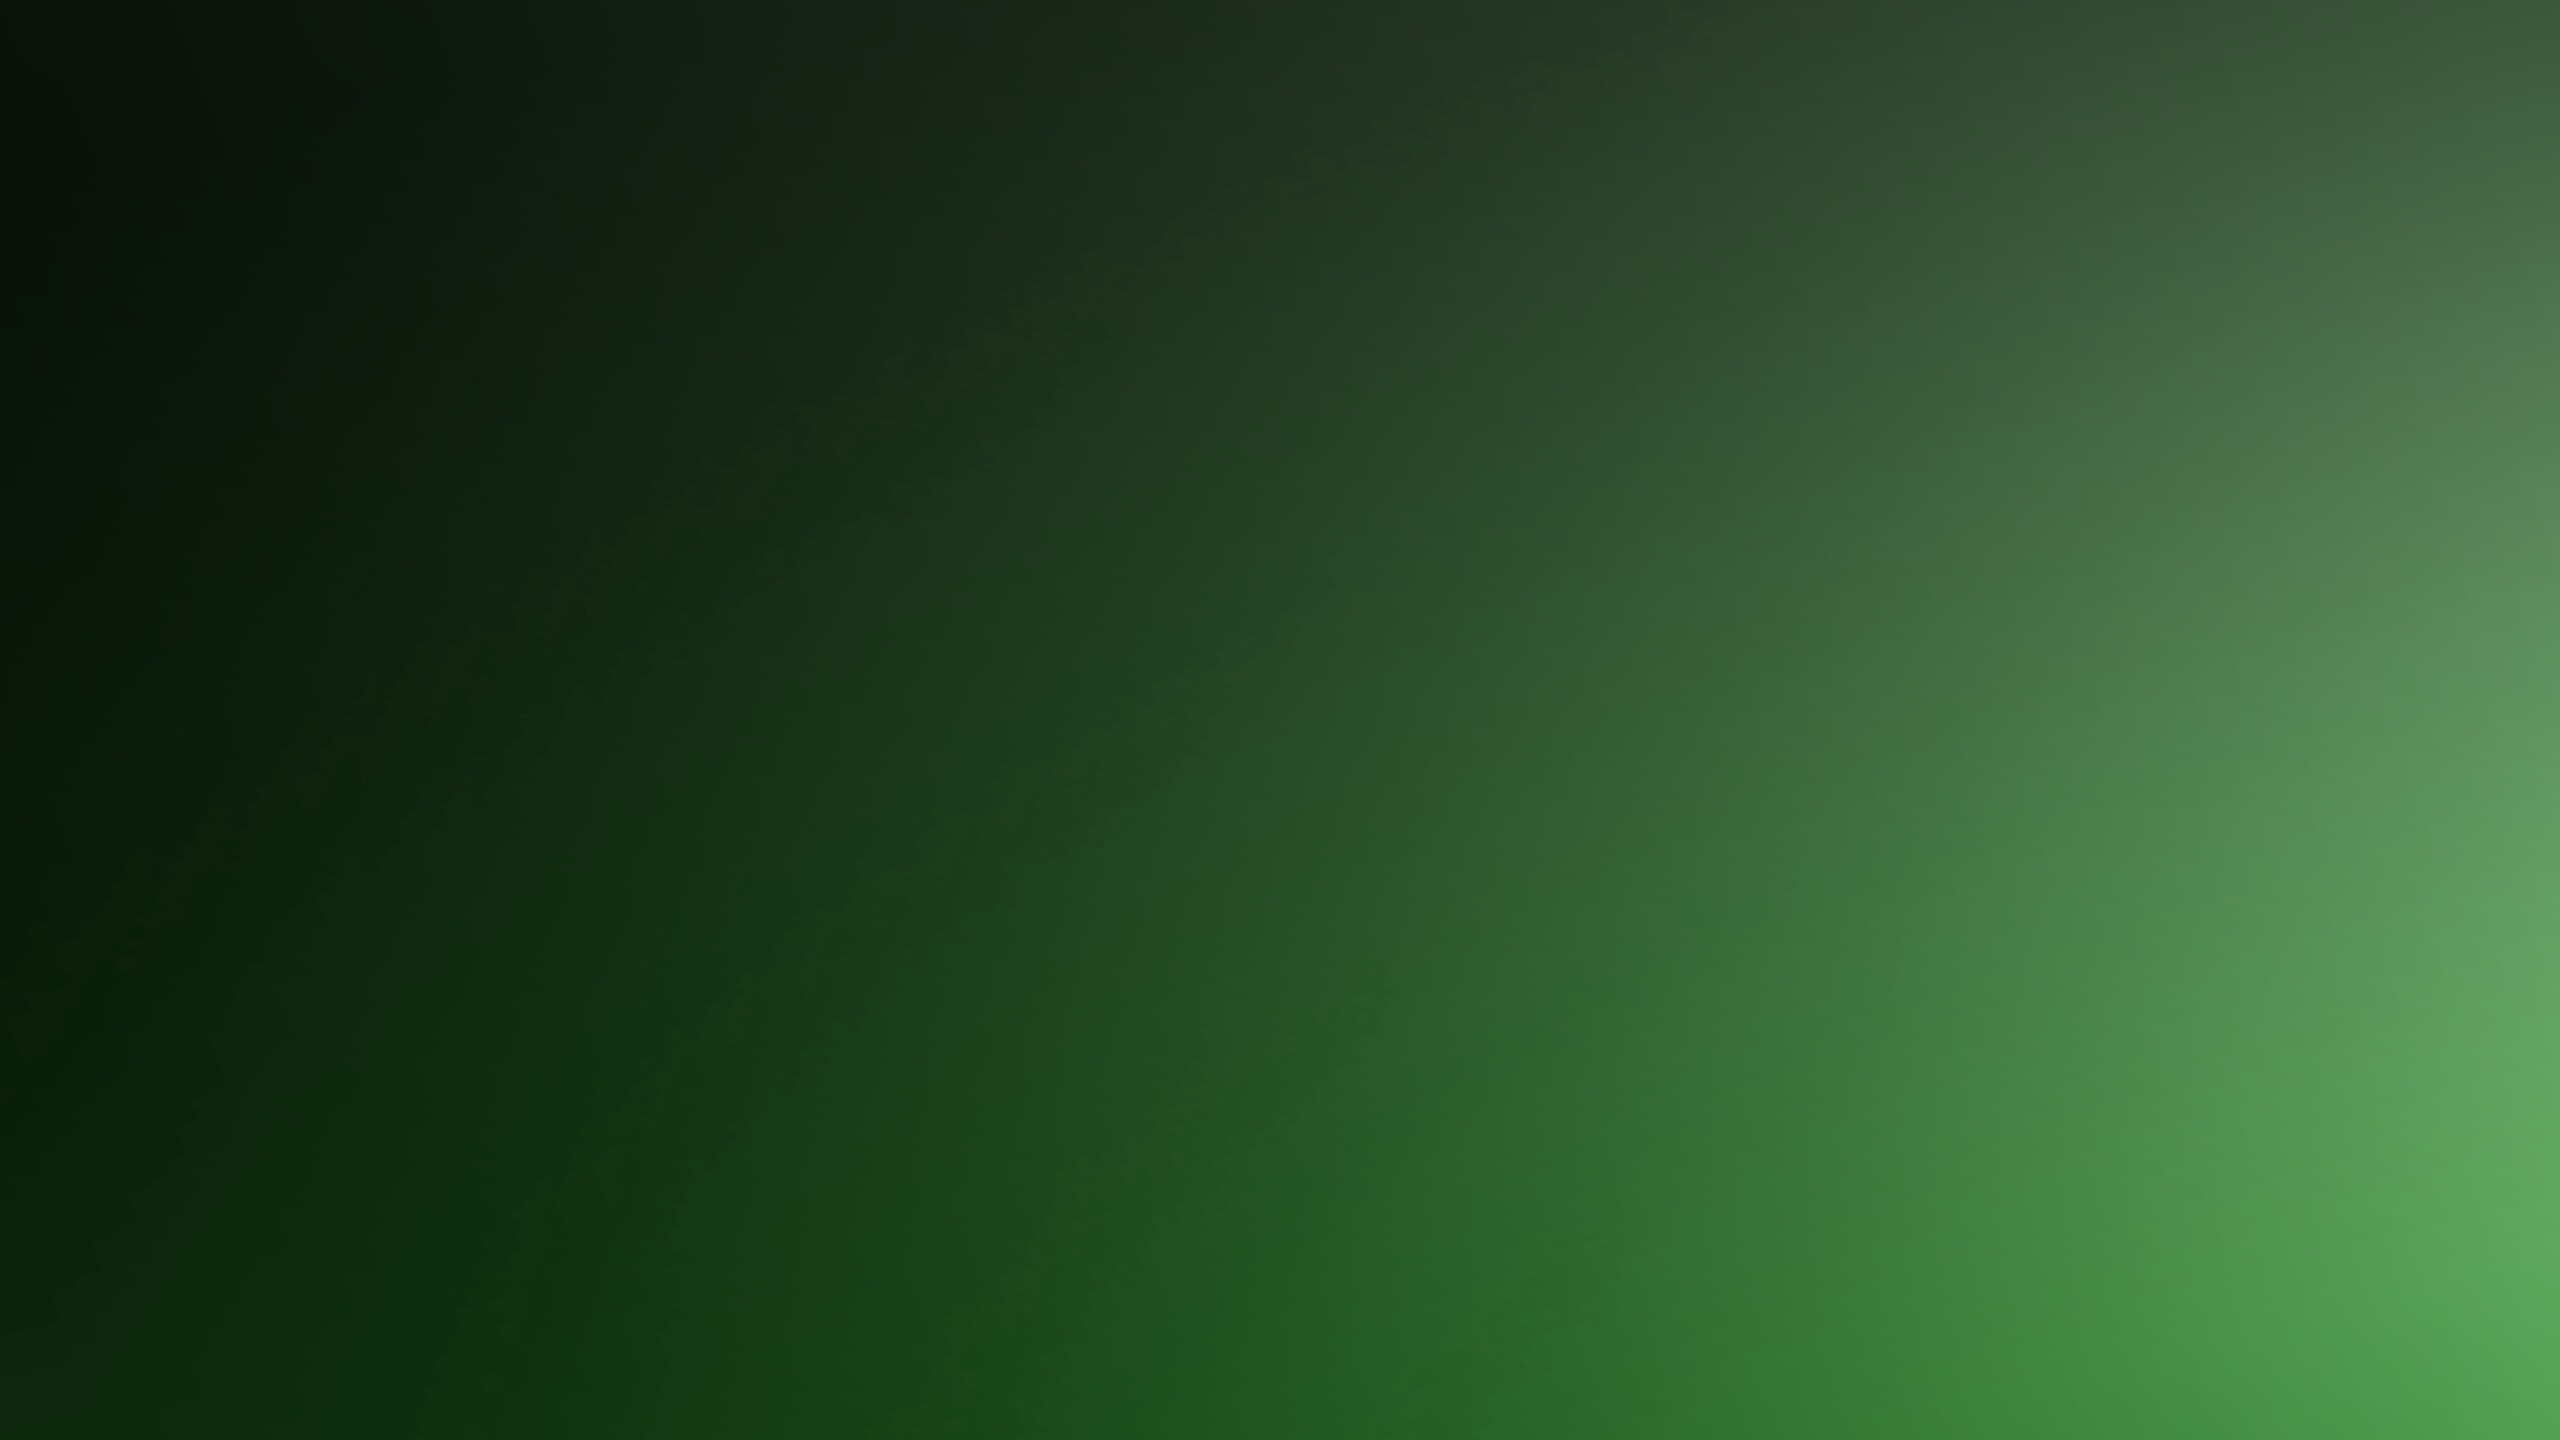 2560x1440, Wallpaper Green, Background, Texture, Solid, - Dark Green Fade Background - HD Wallpaper 